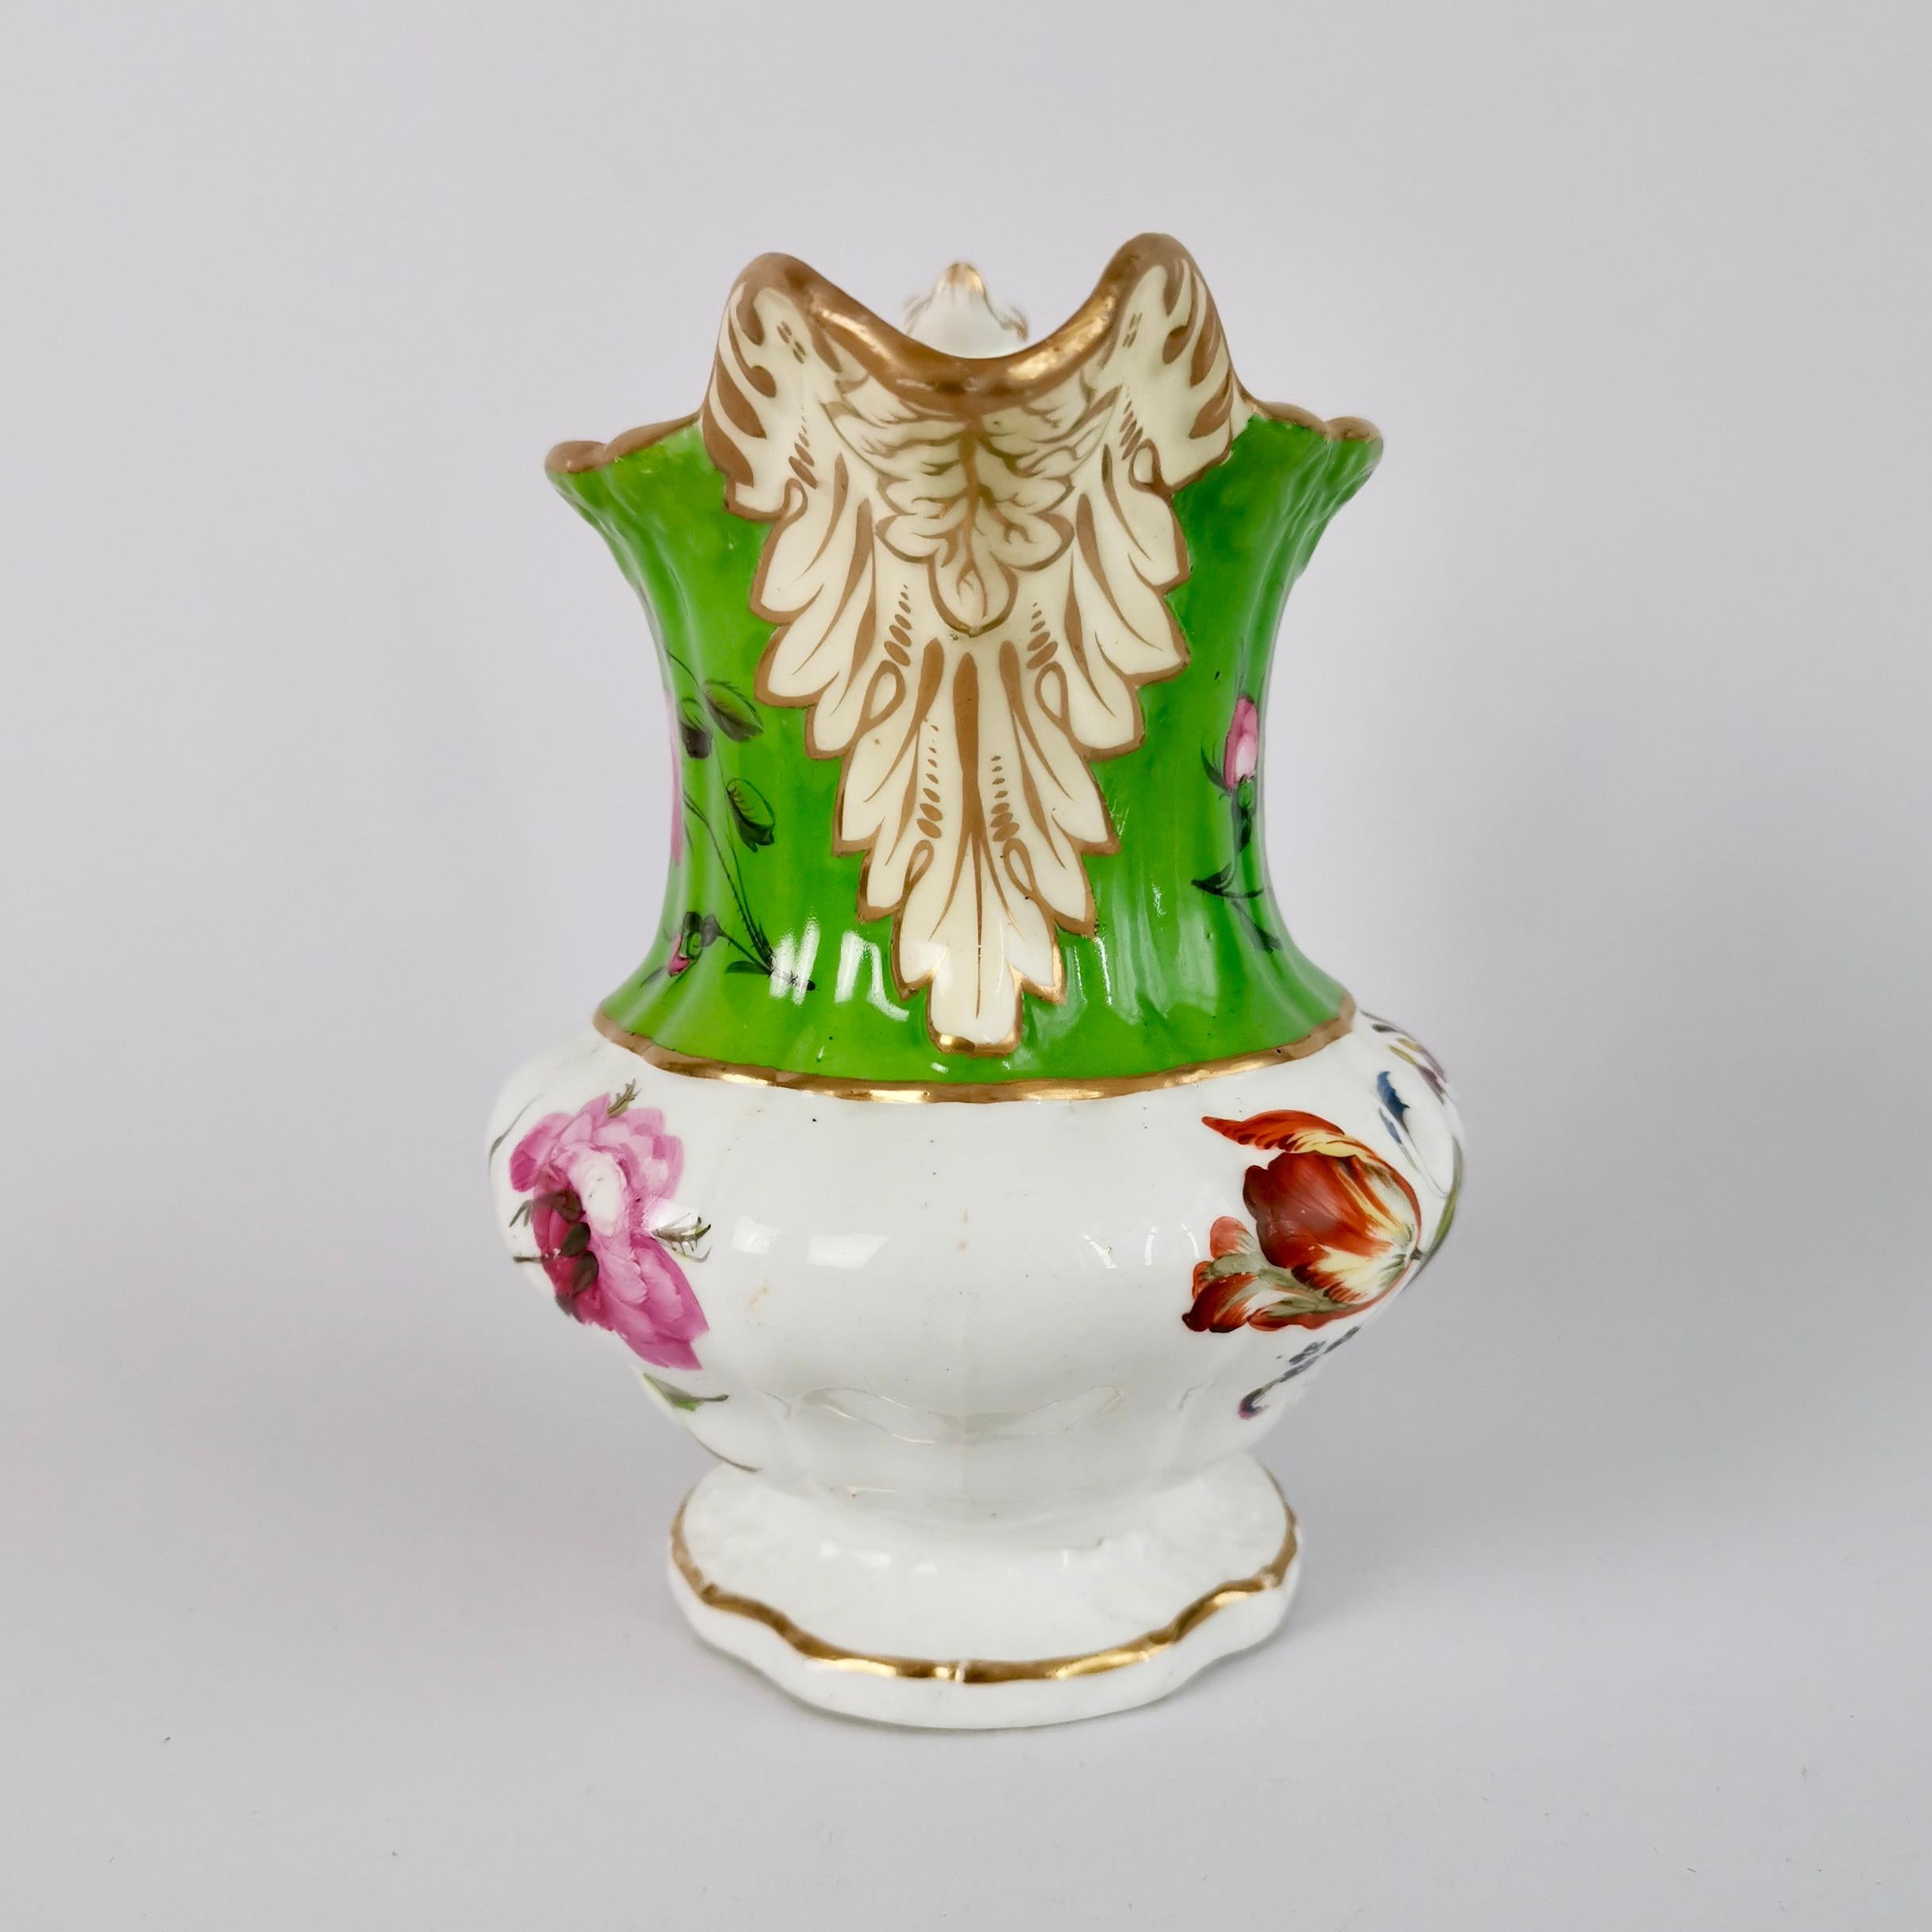 Regency Hilditch Porcelain Pitcher, Apple Green with Hand Painted Flowers, circa 1830